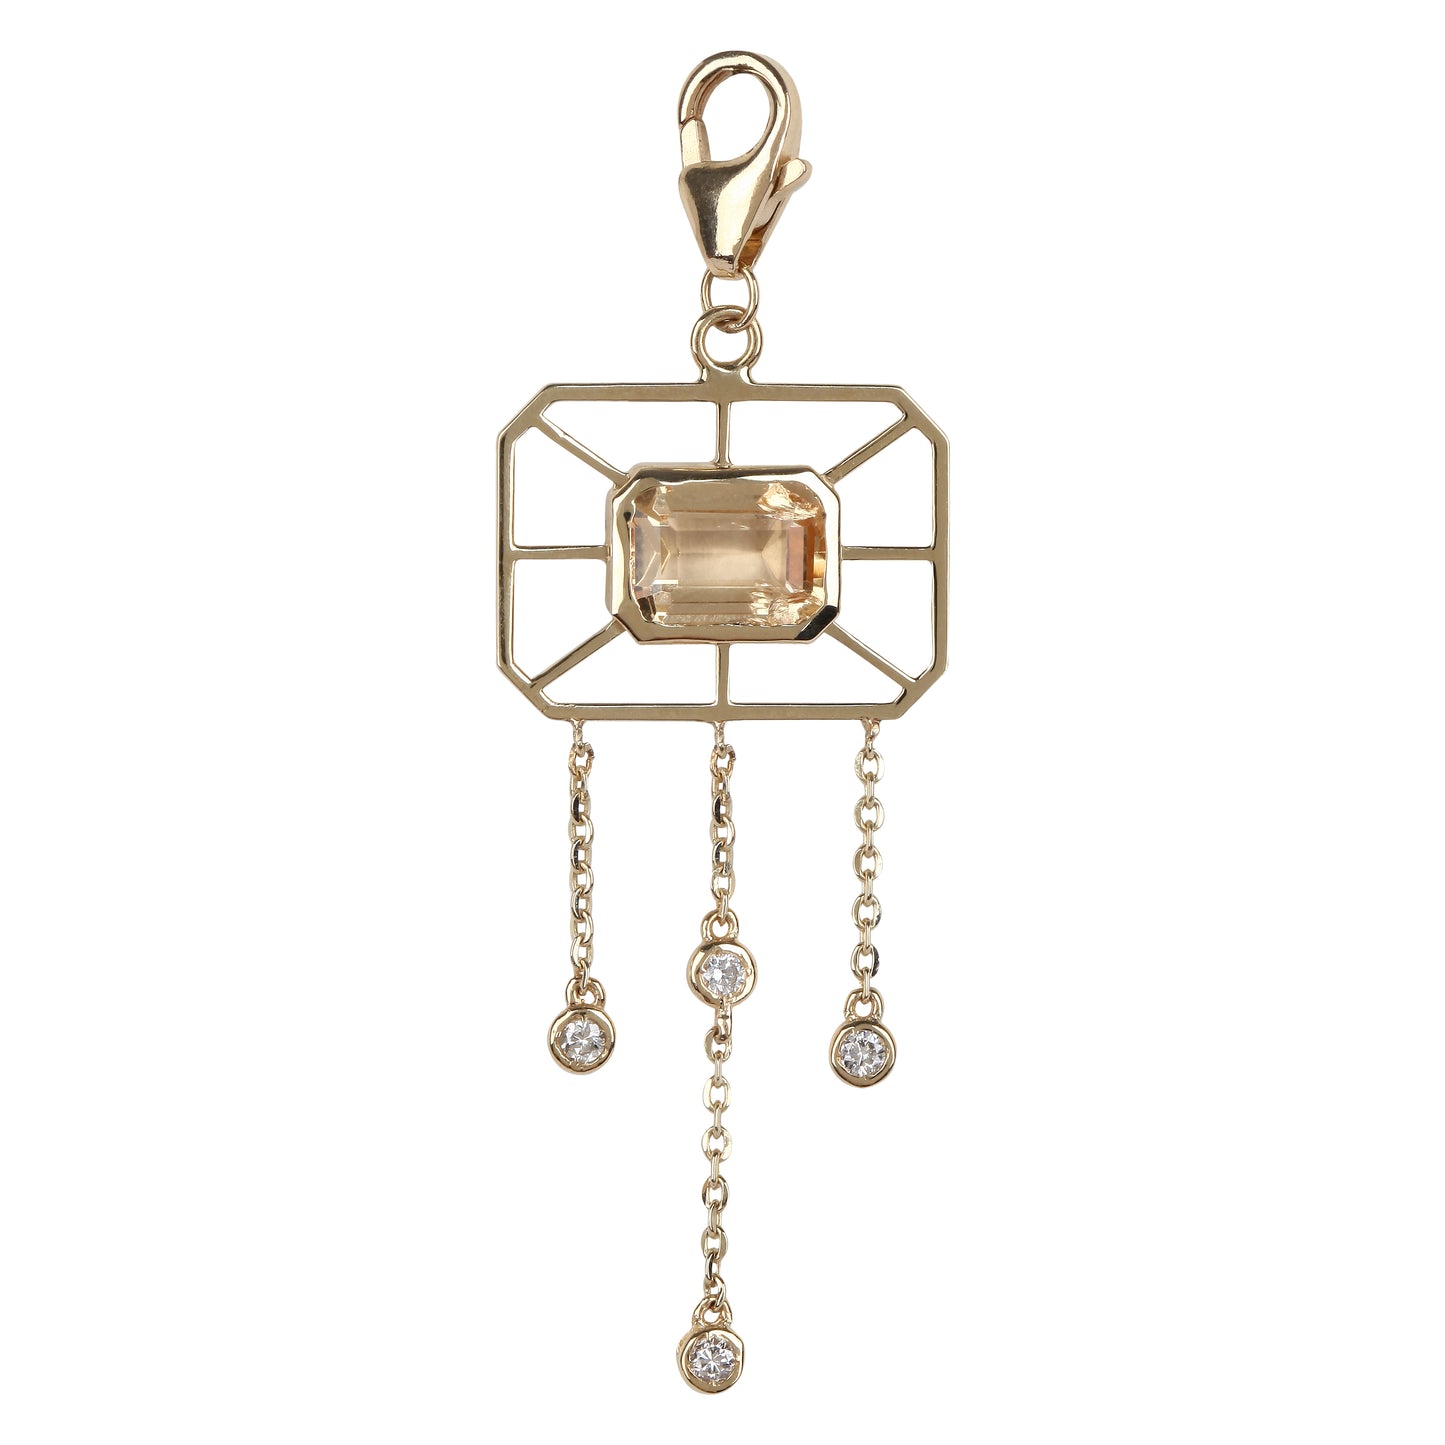 Net charm with yellow Royal Topaz and diamonds in yellow gold